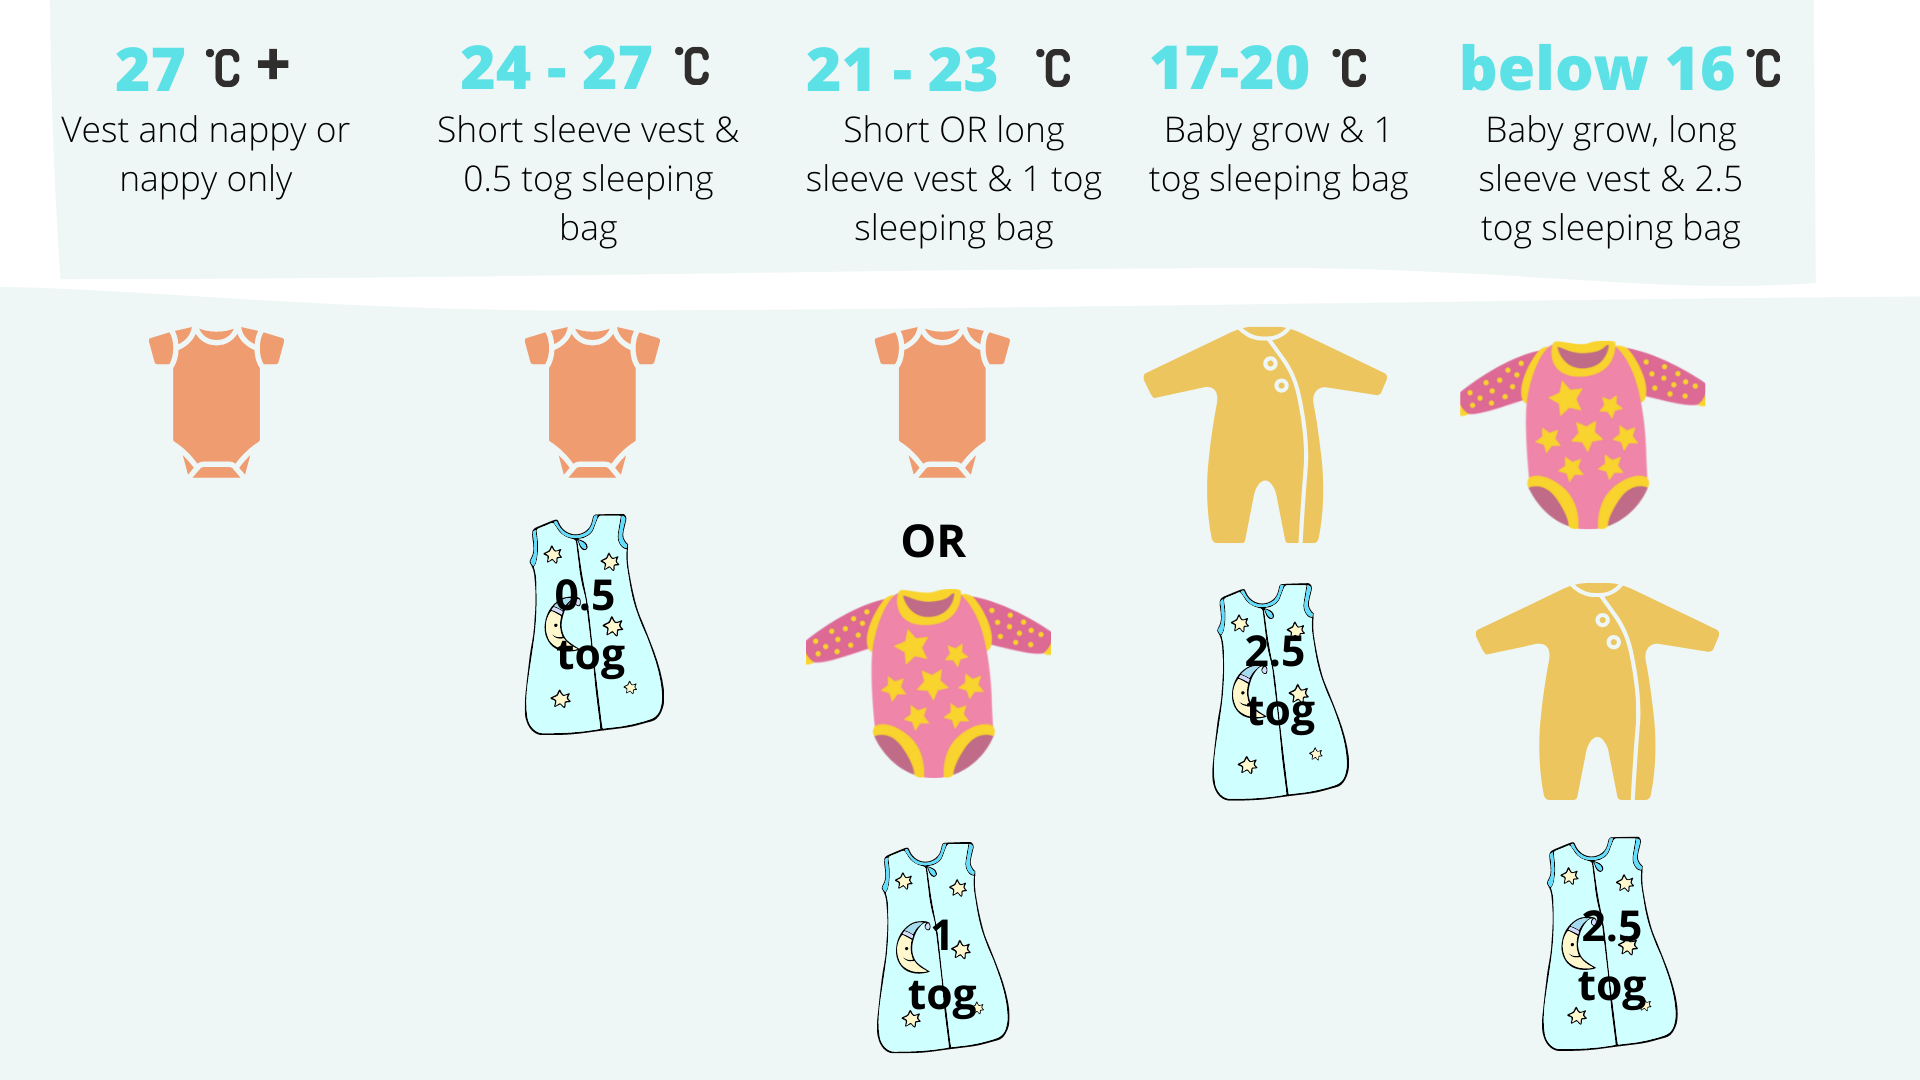 infographic on best room temperature for babies